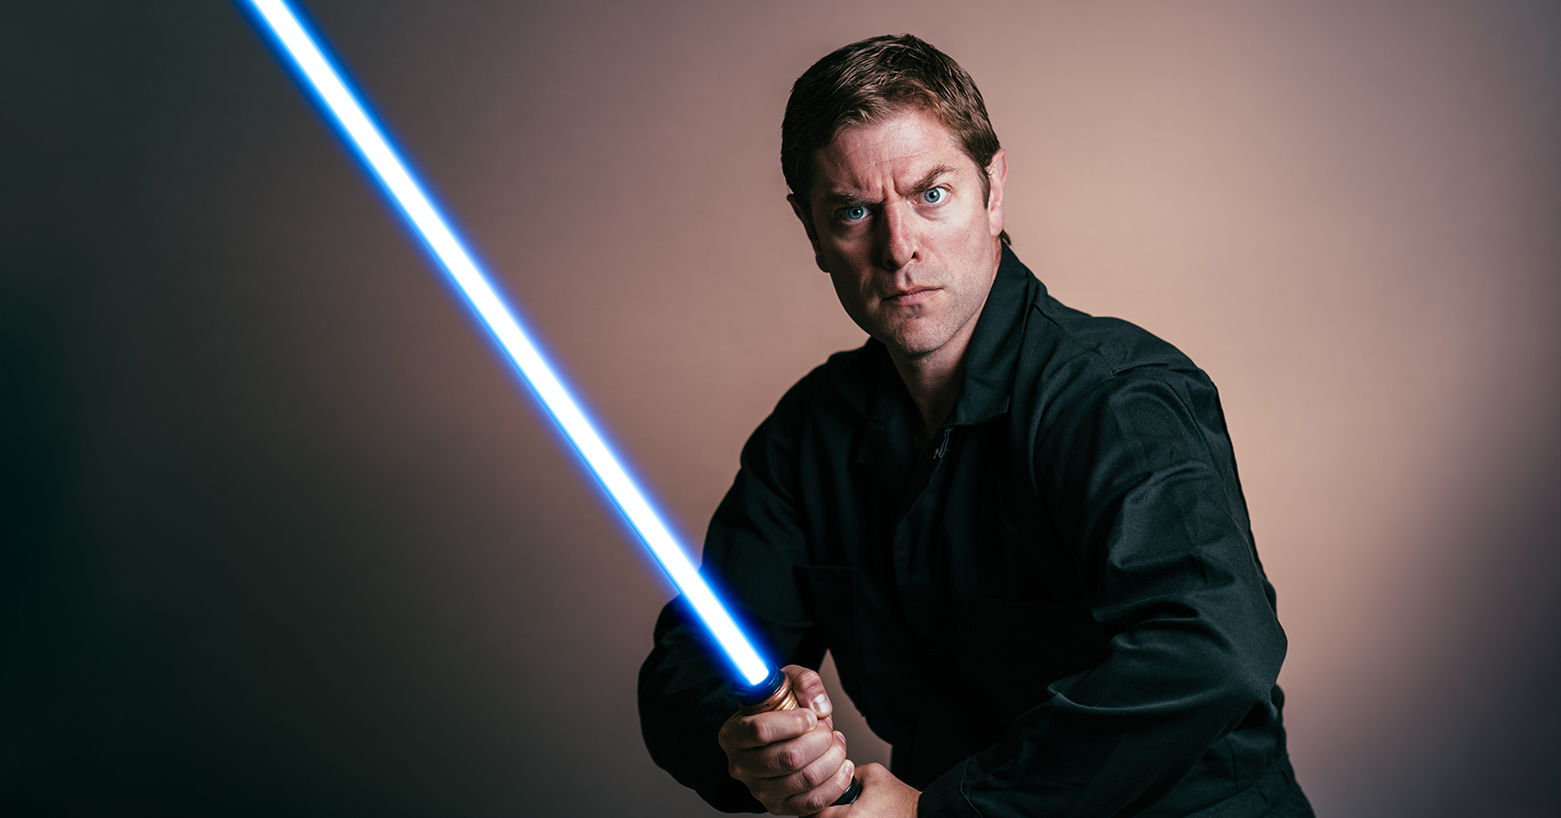 Photo of Charles Ross dressed as a Jedi, holding a blue lightsaber.